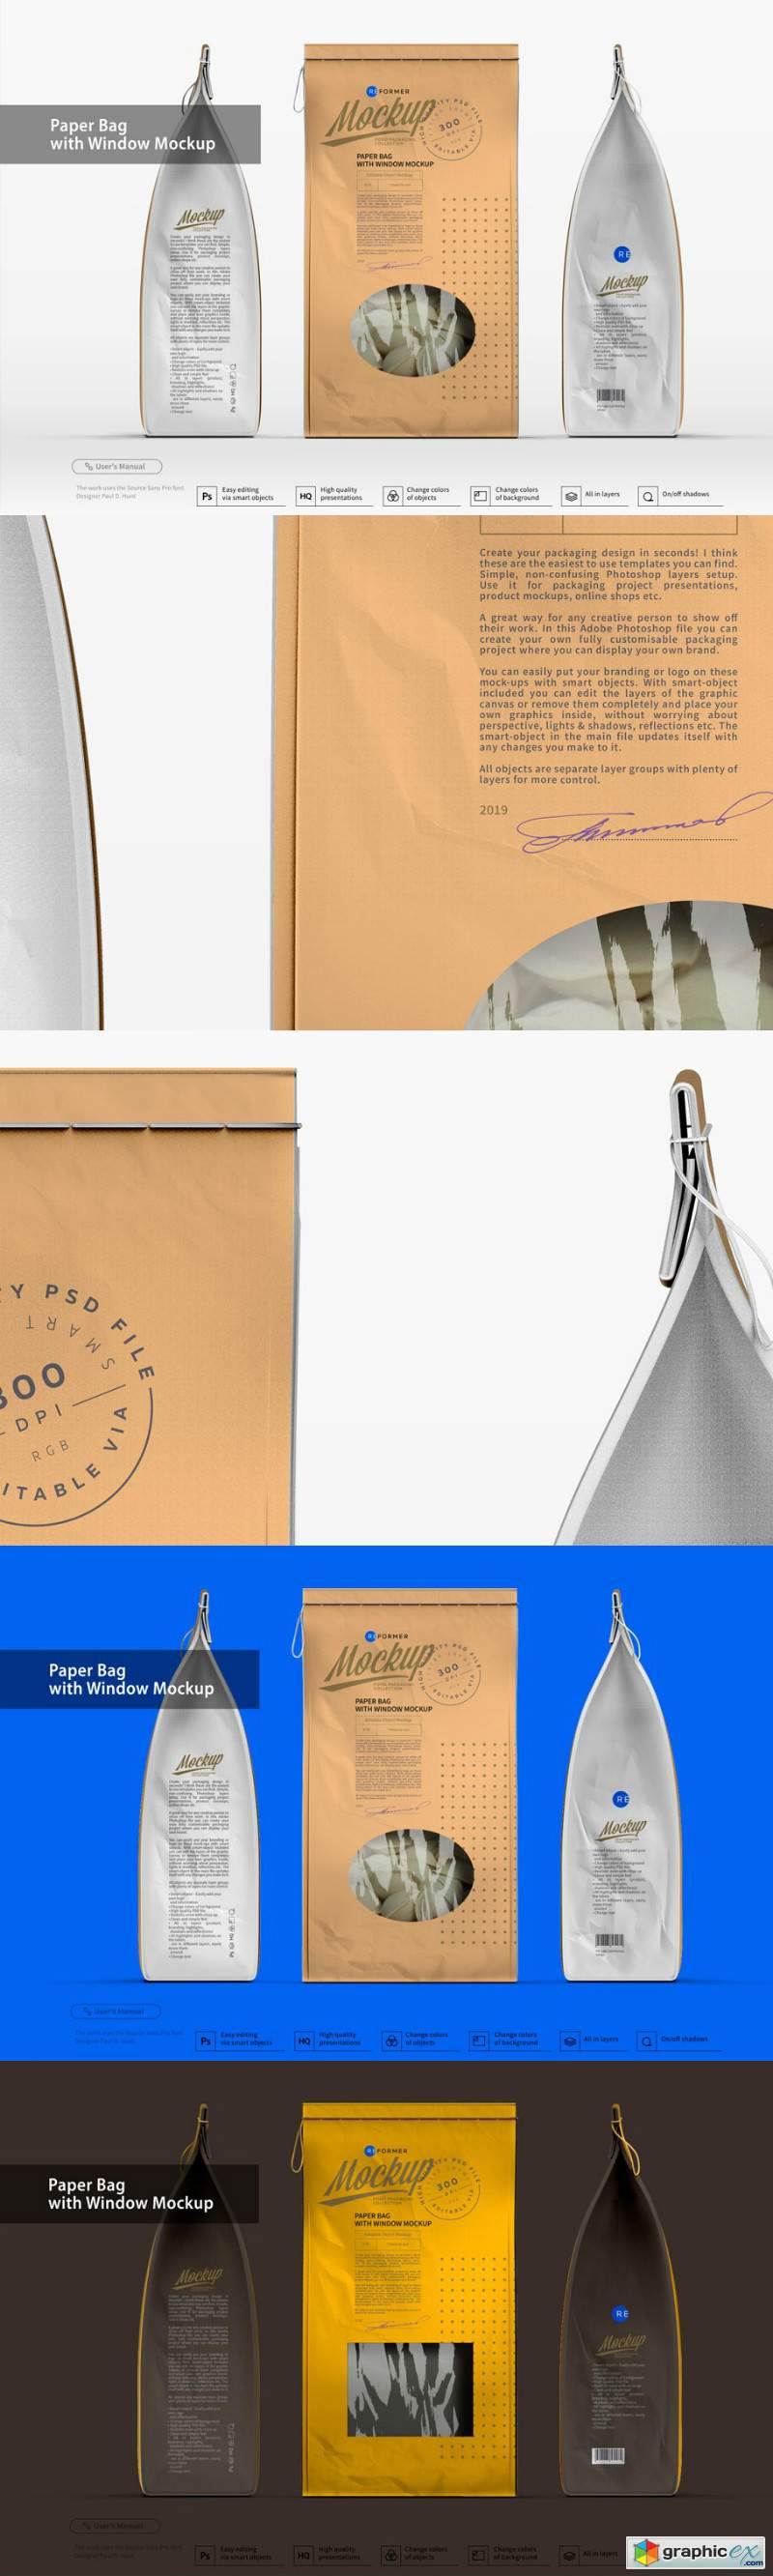 Paper Bag with Window Mockup